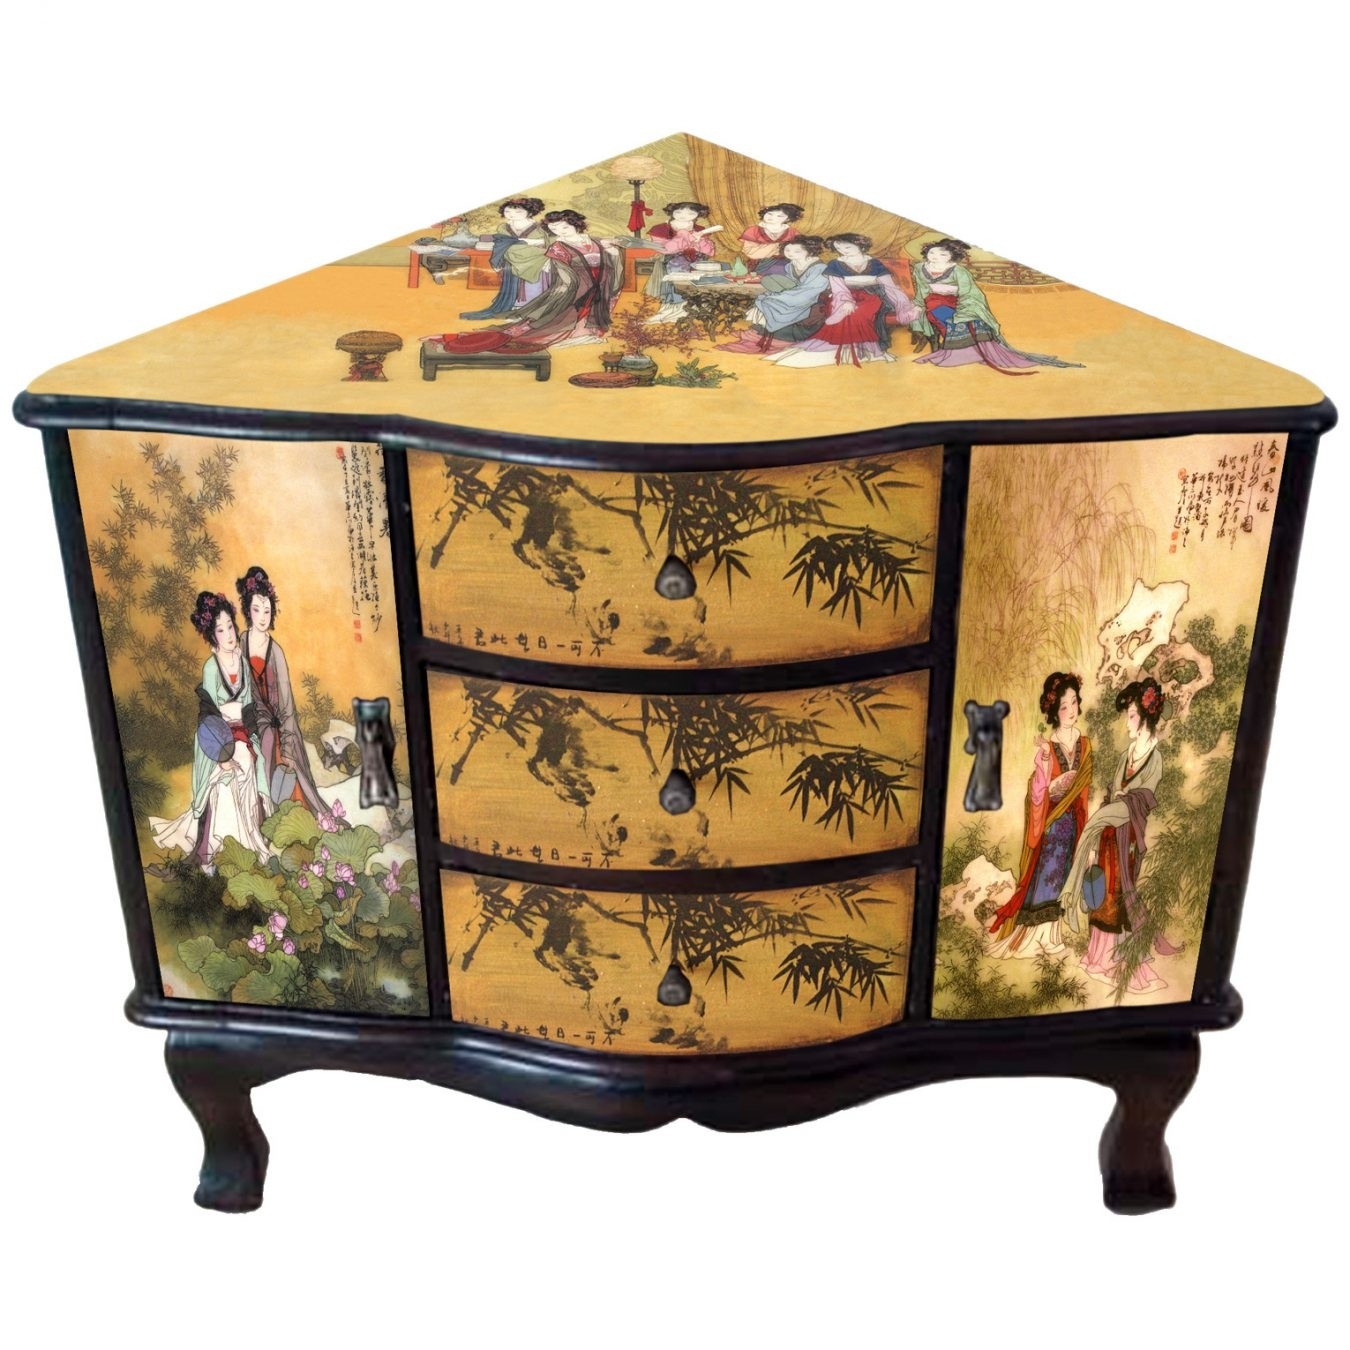 Oriental Furniture Best Quality Low Price Japanese Style Decor Accent Accessory, 24-Inch Enchanted Ladies Asian Design Corner Cabinet